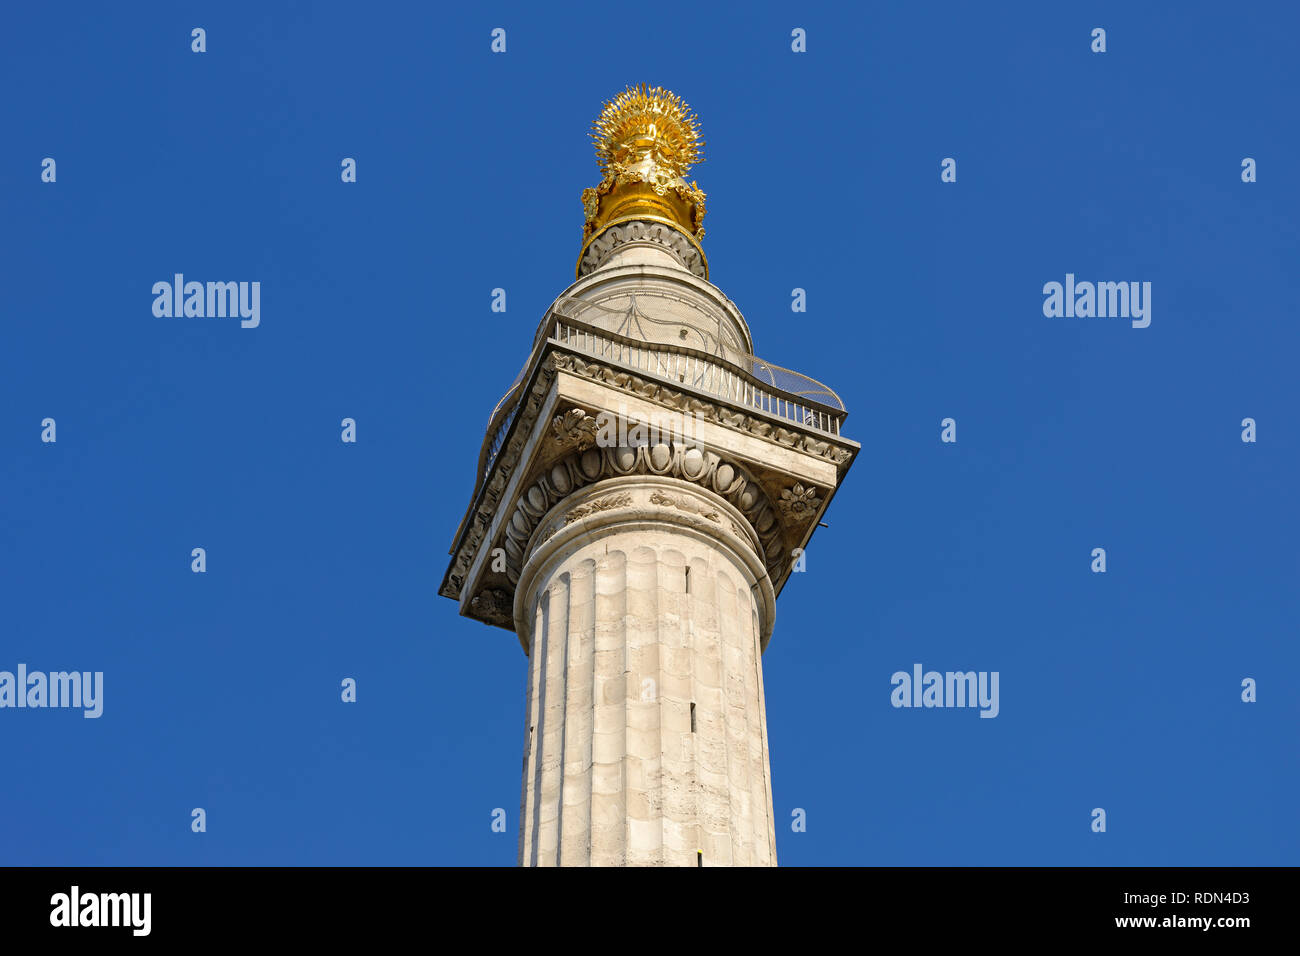 Monument to the Great Fire of London, England, United Kingdom Stock Photo